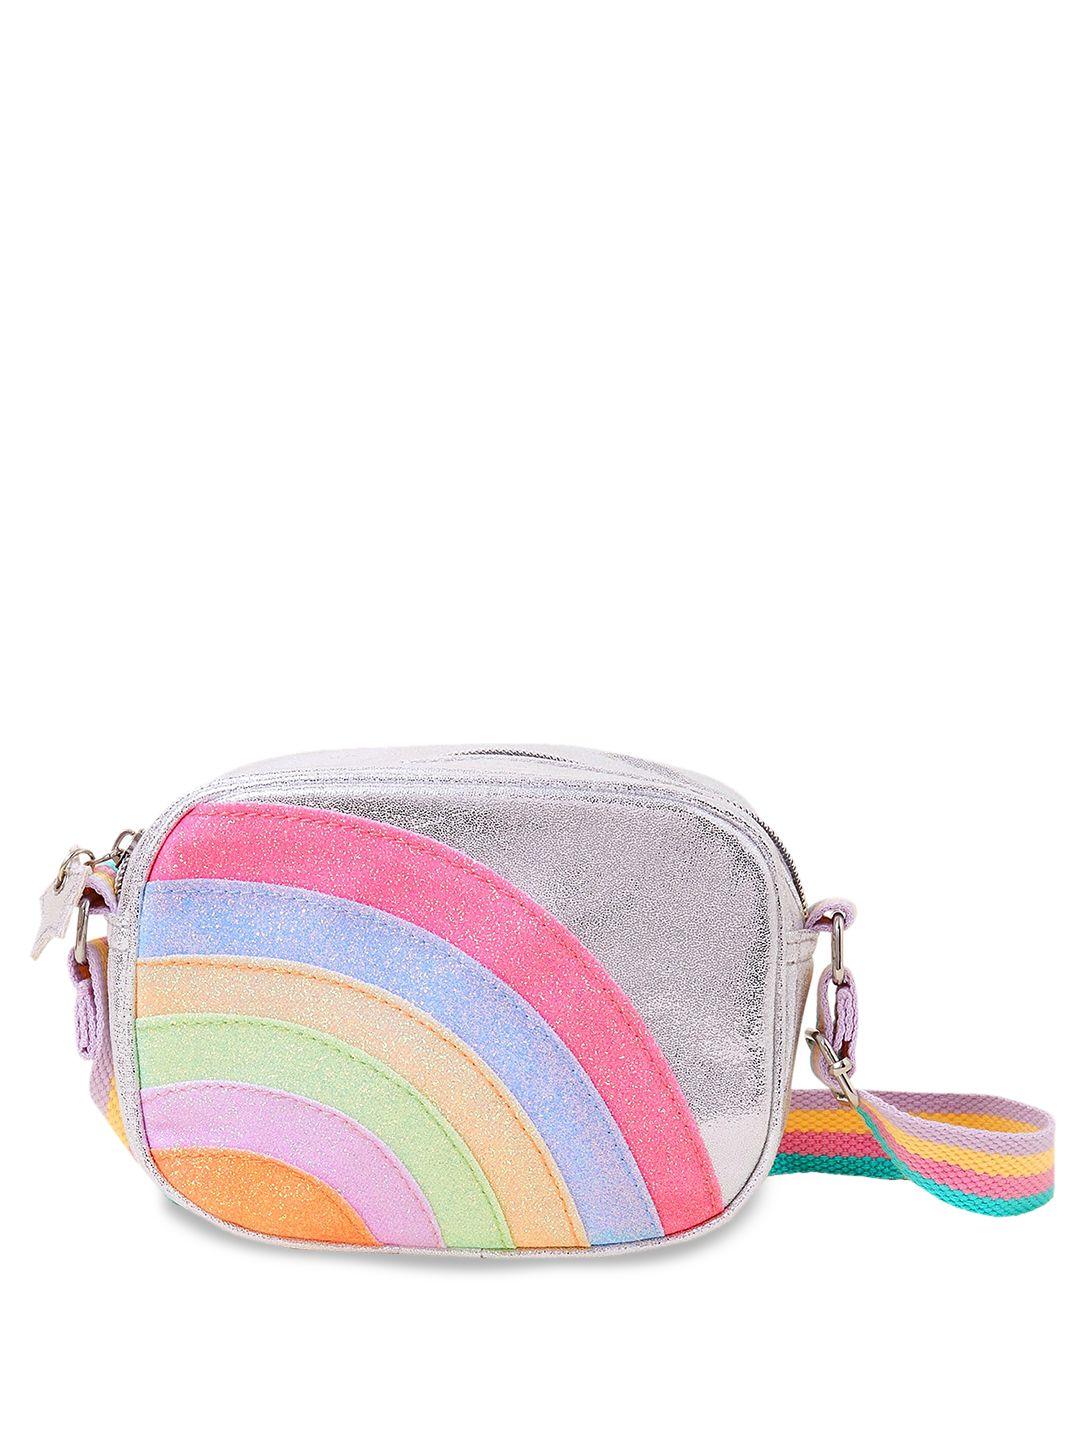 accessorize-girls-colourblocked-structured-sling-bag